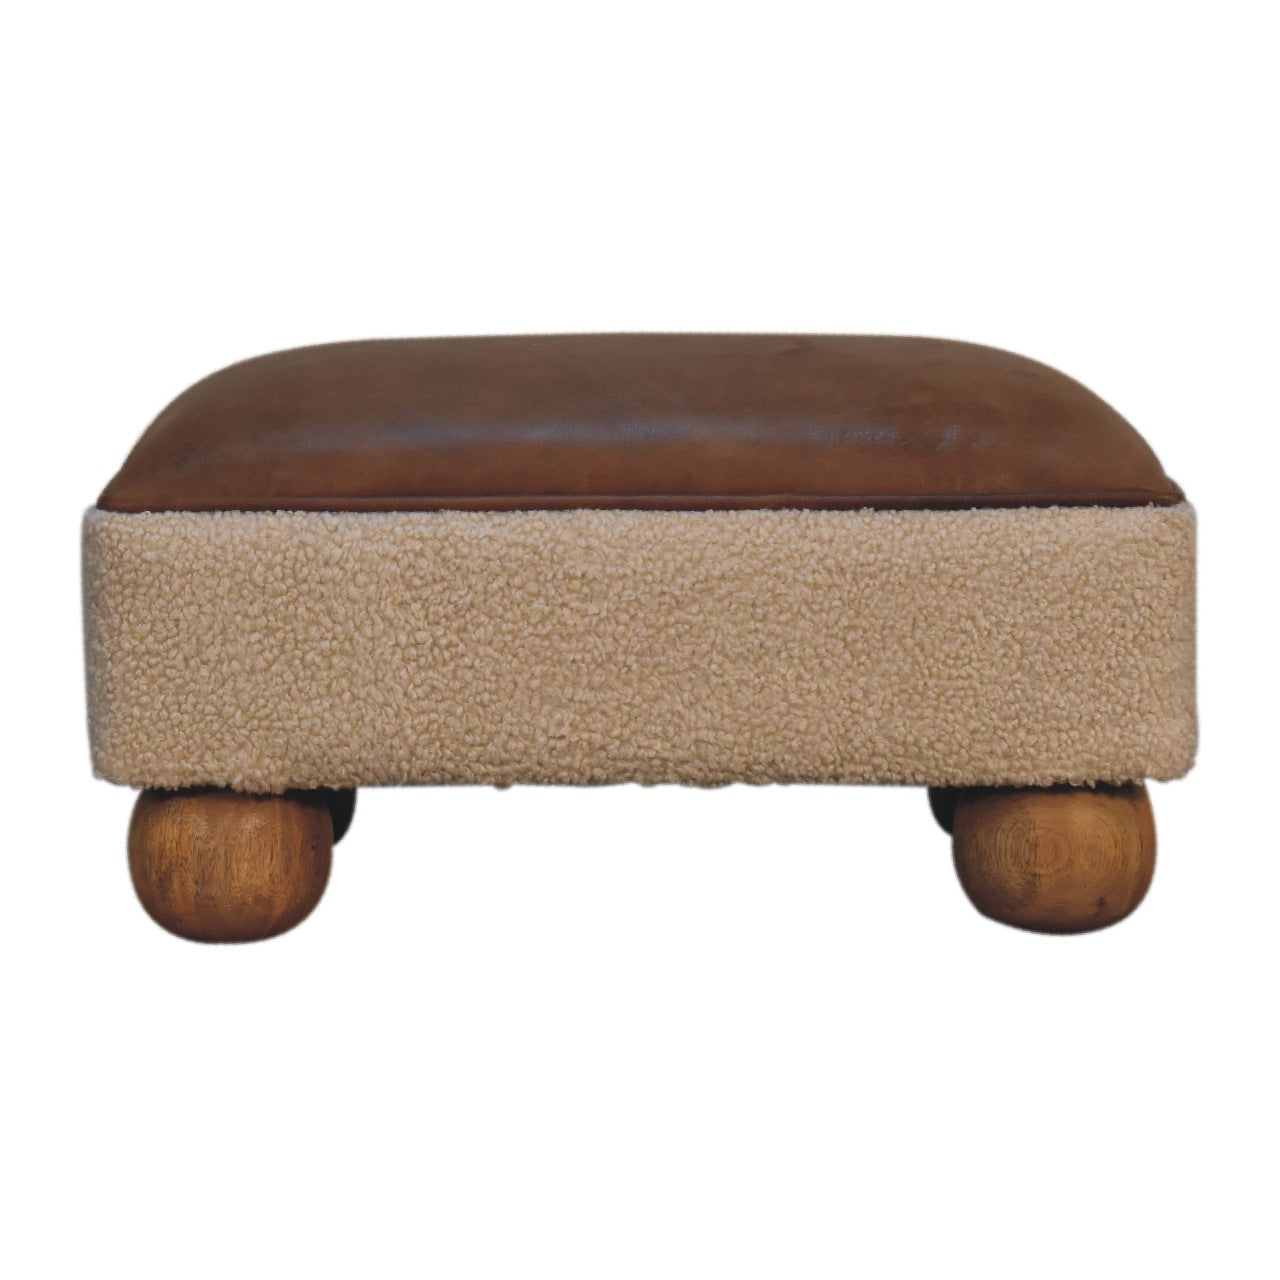 View Tan Leather Boucle Ball Footstool information